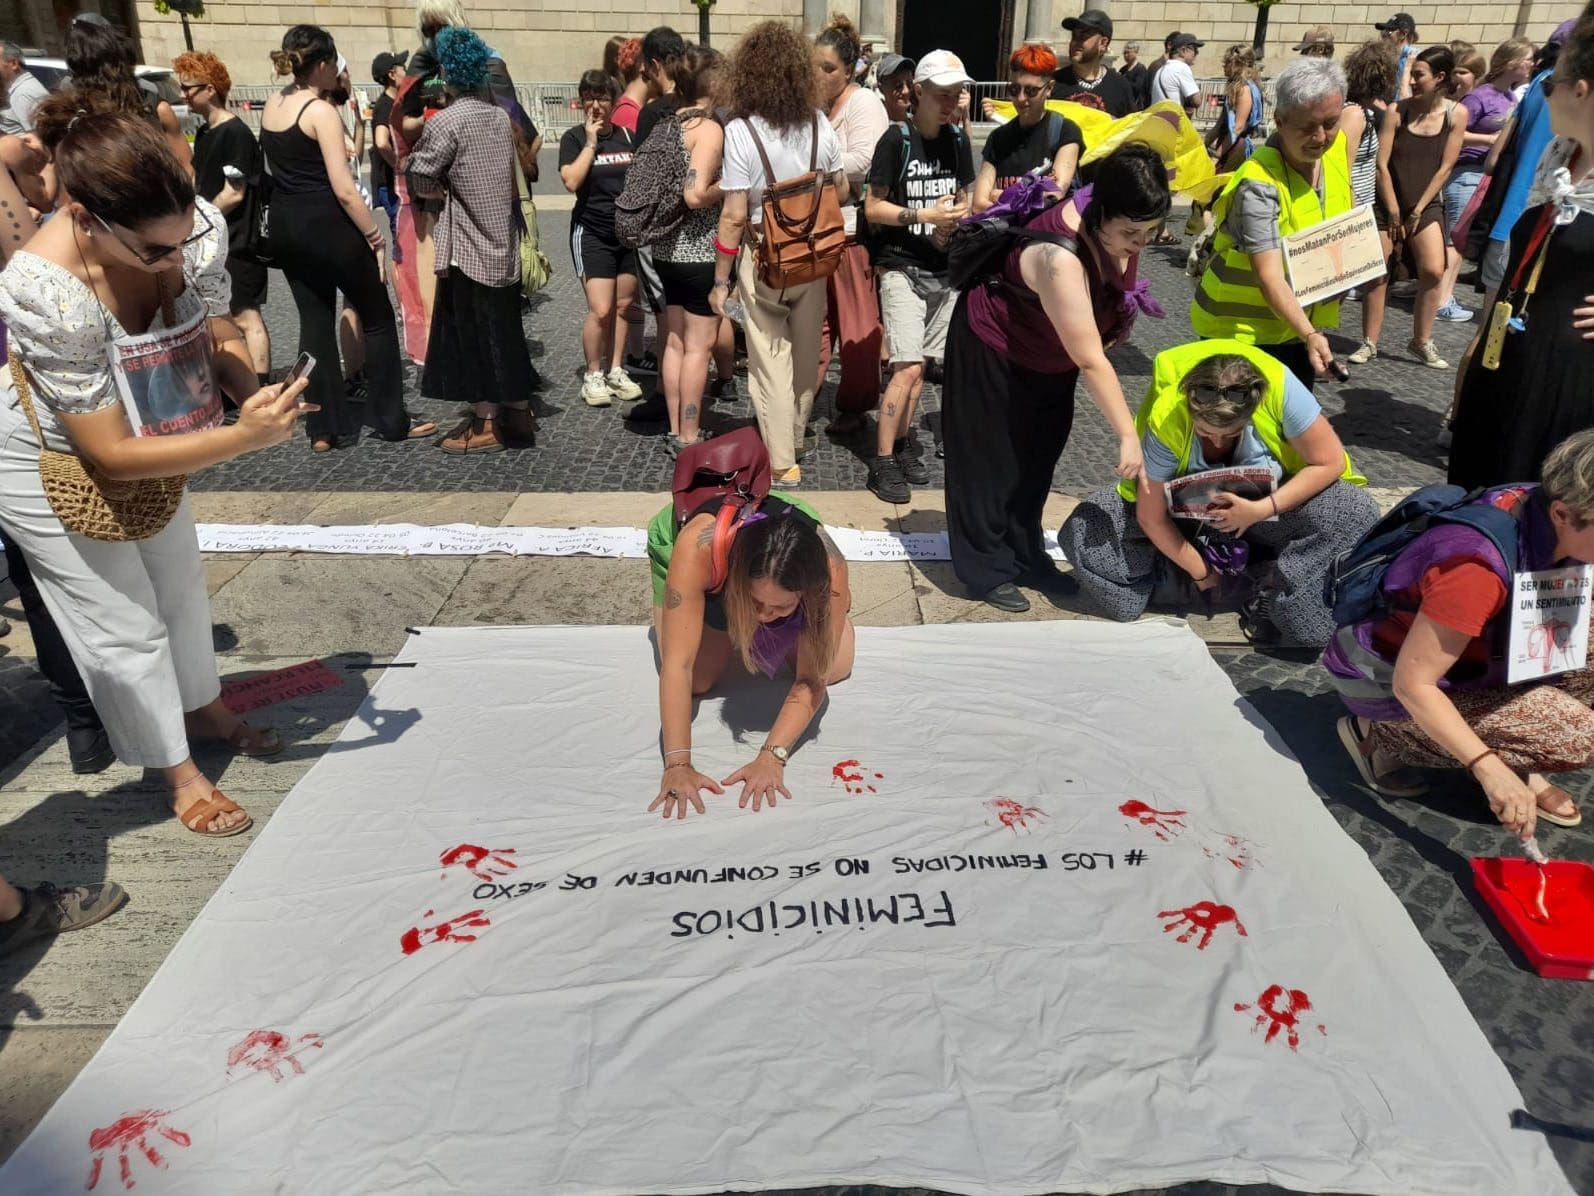 Women gathered on the streets leaving handprints on the banner "No Feminicidios" (Say no to murdering women)